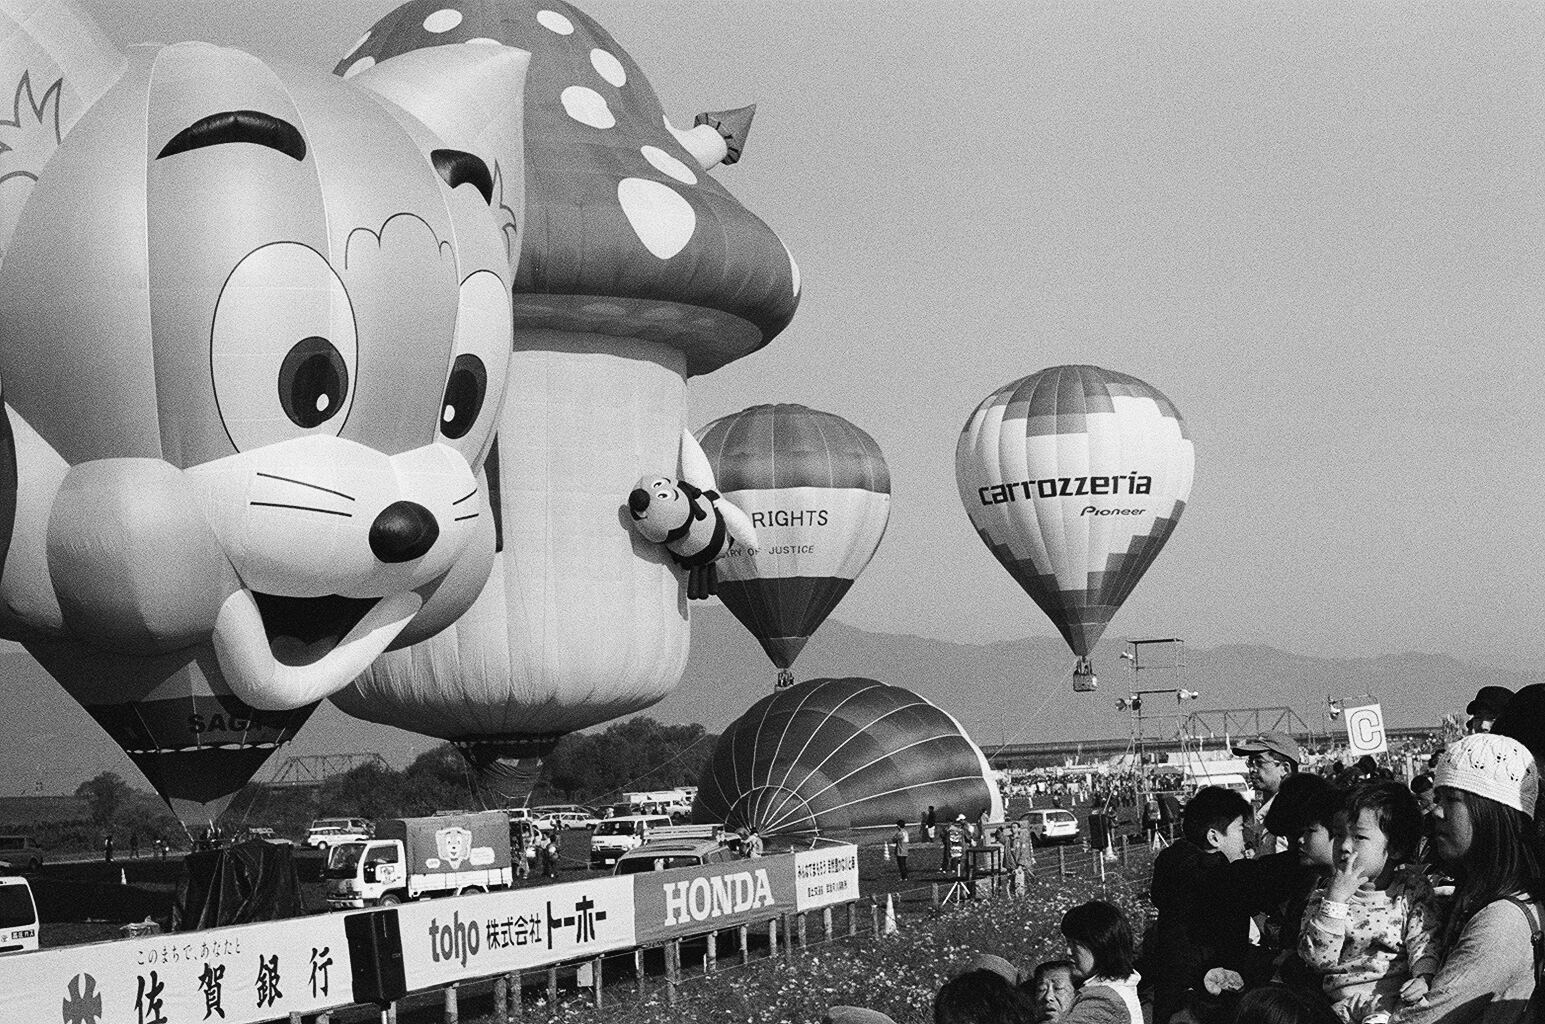 Black and white photograph of hot-air balloons